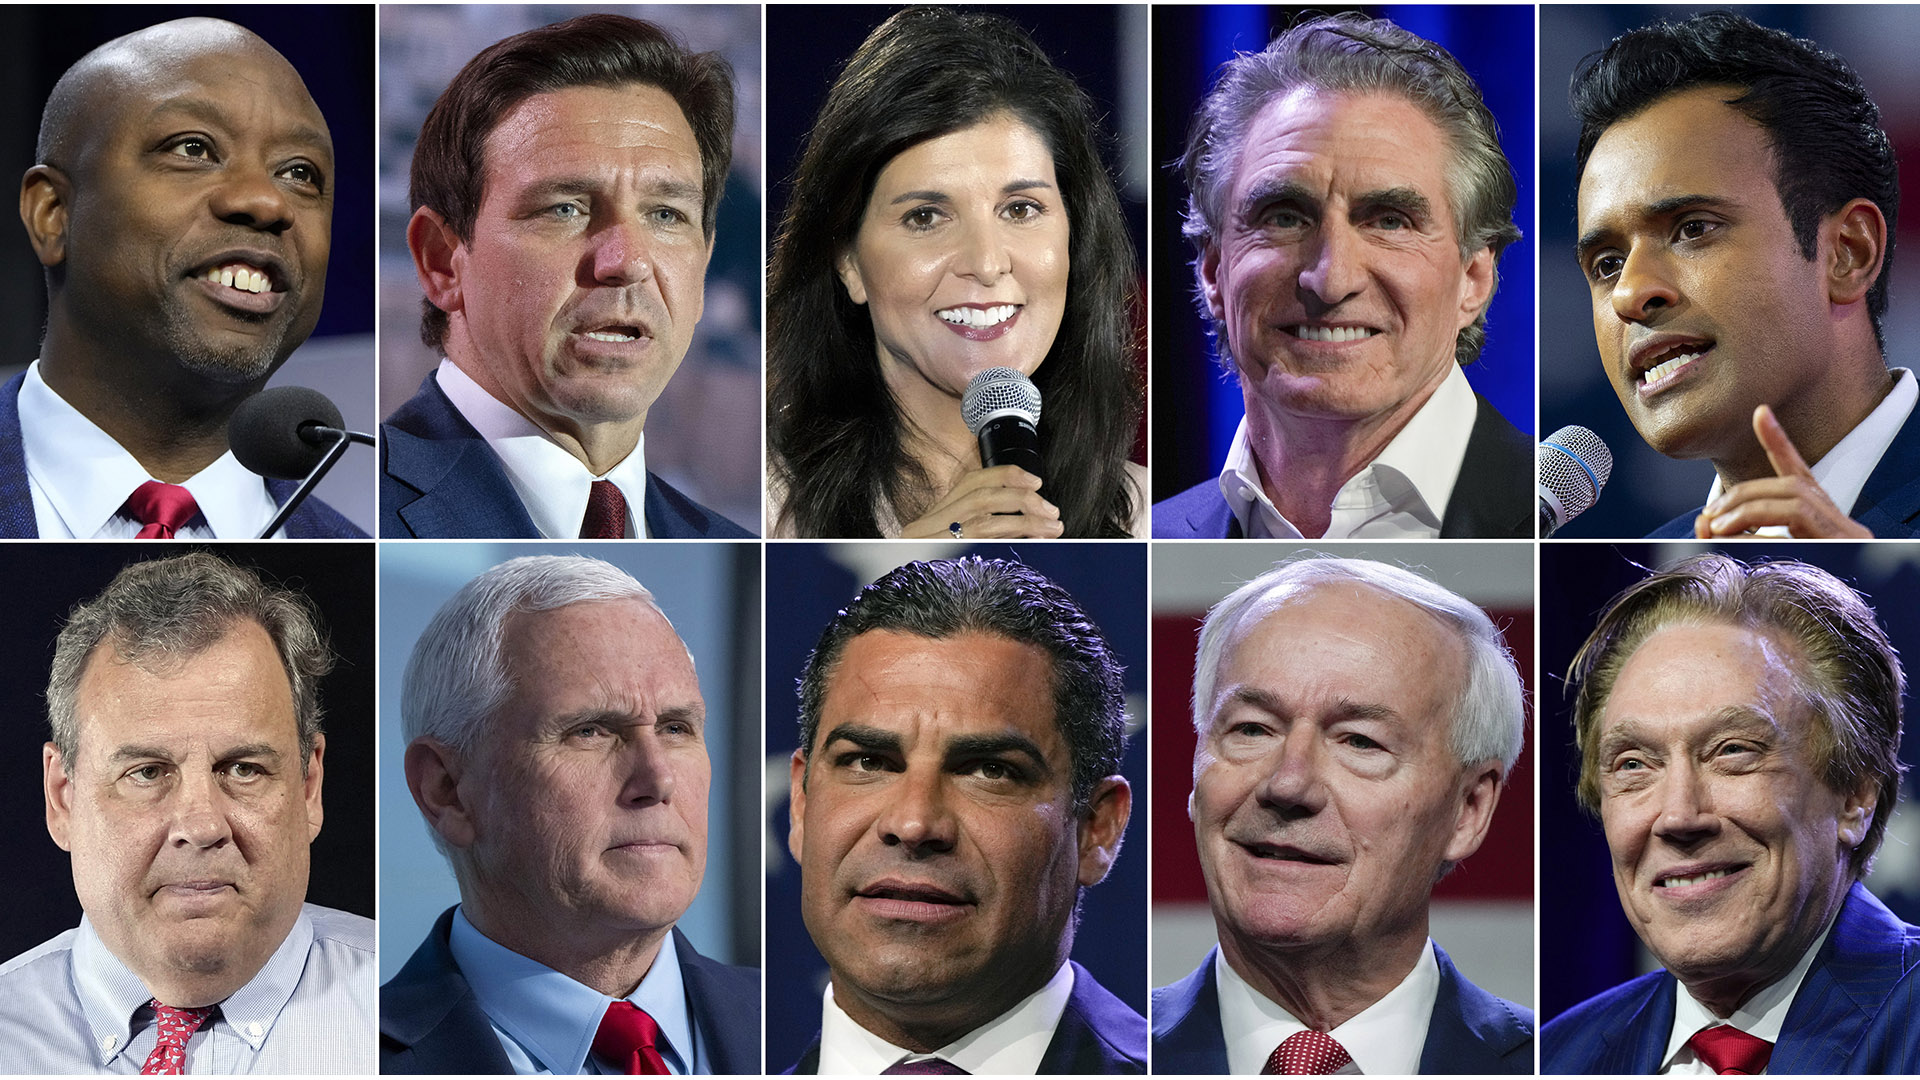 A collage of portraits shows 10 candidates who are running in the Republican presidential primary for the 2024 election.